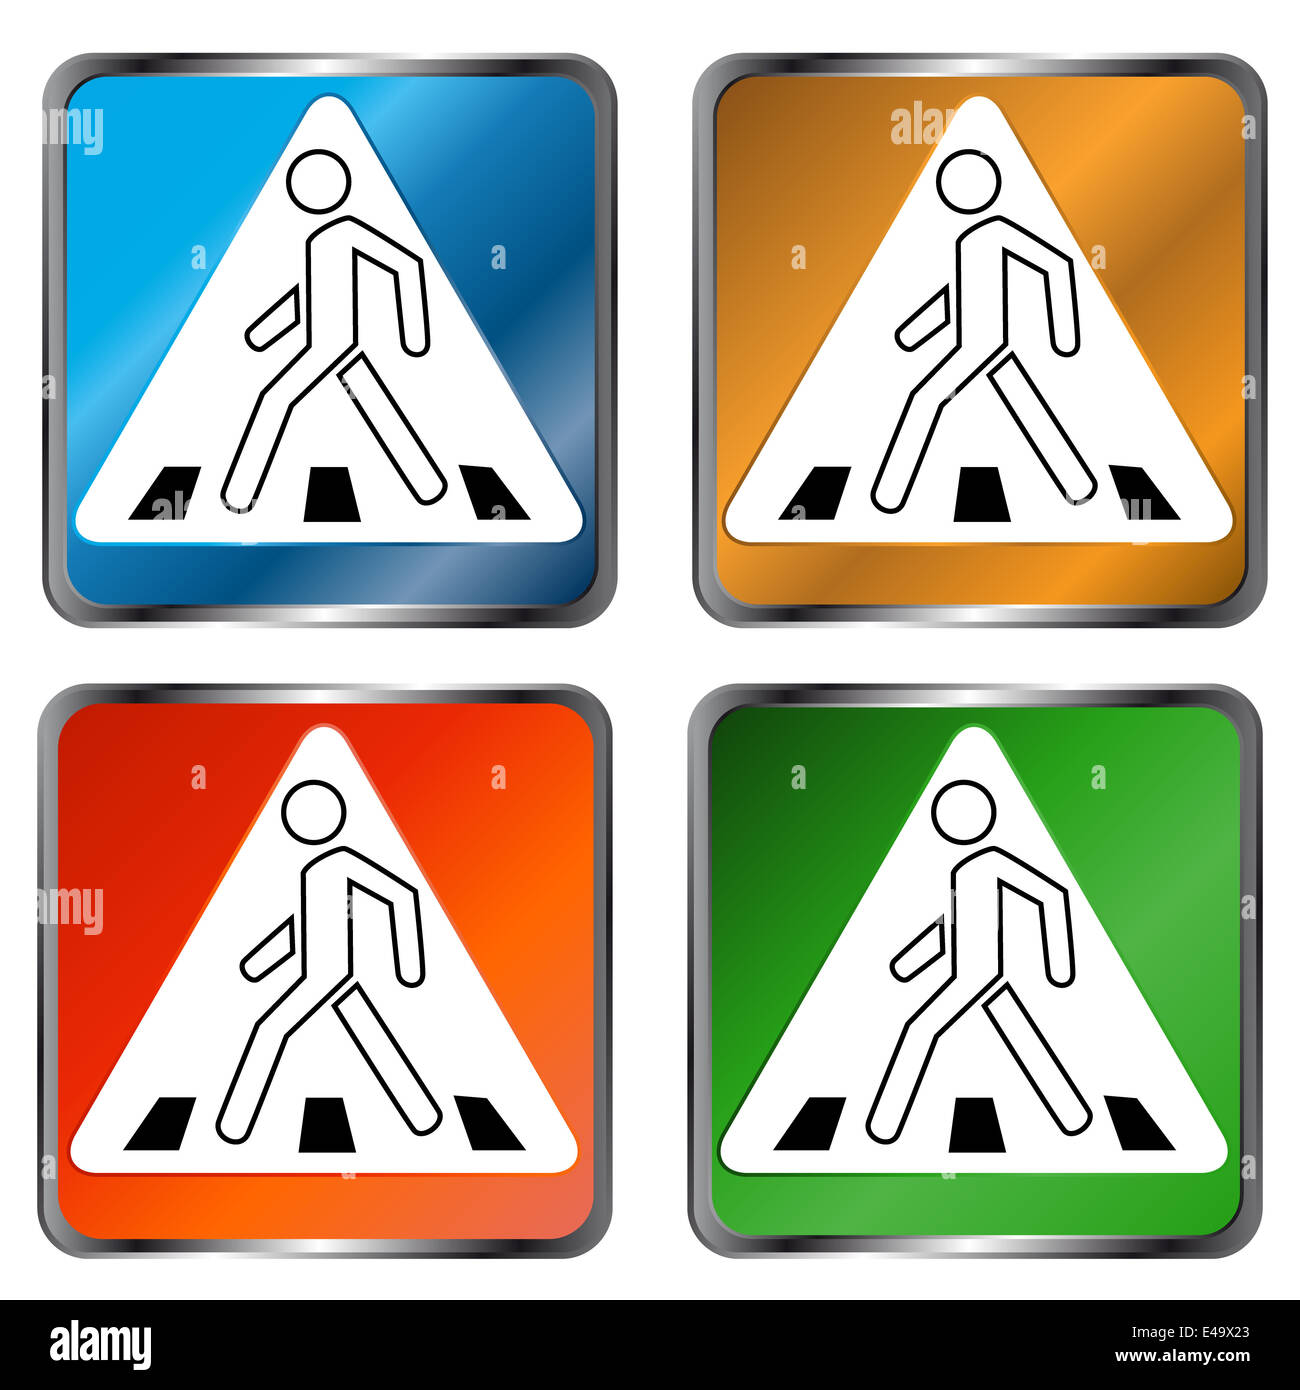 Pedestrian crossing signs Stock Photo